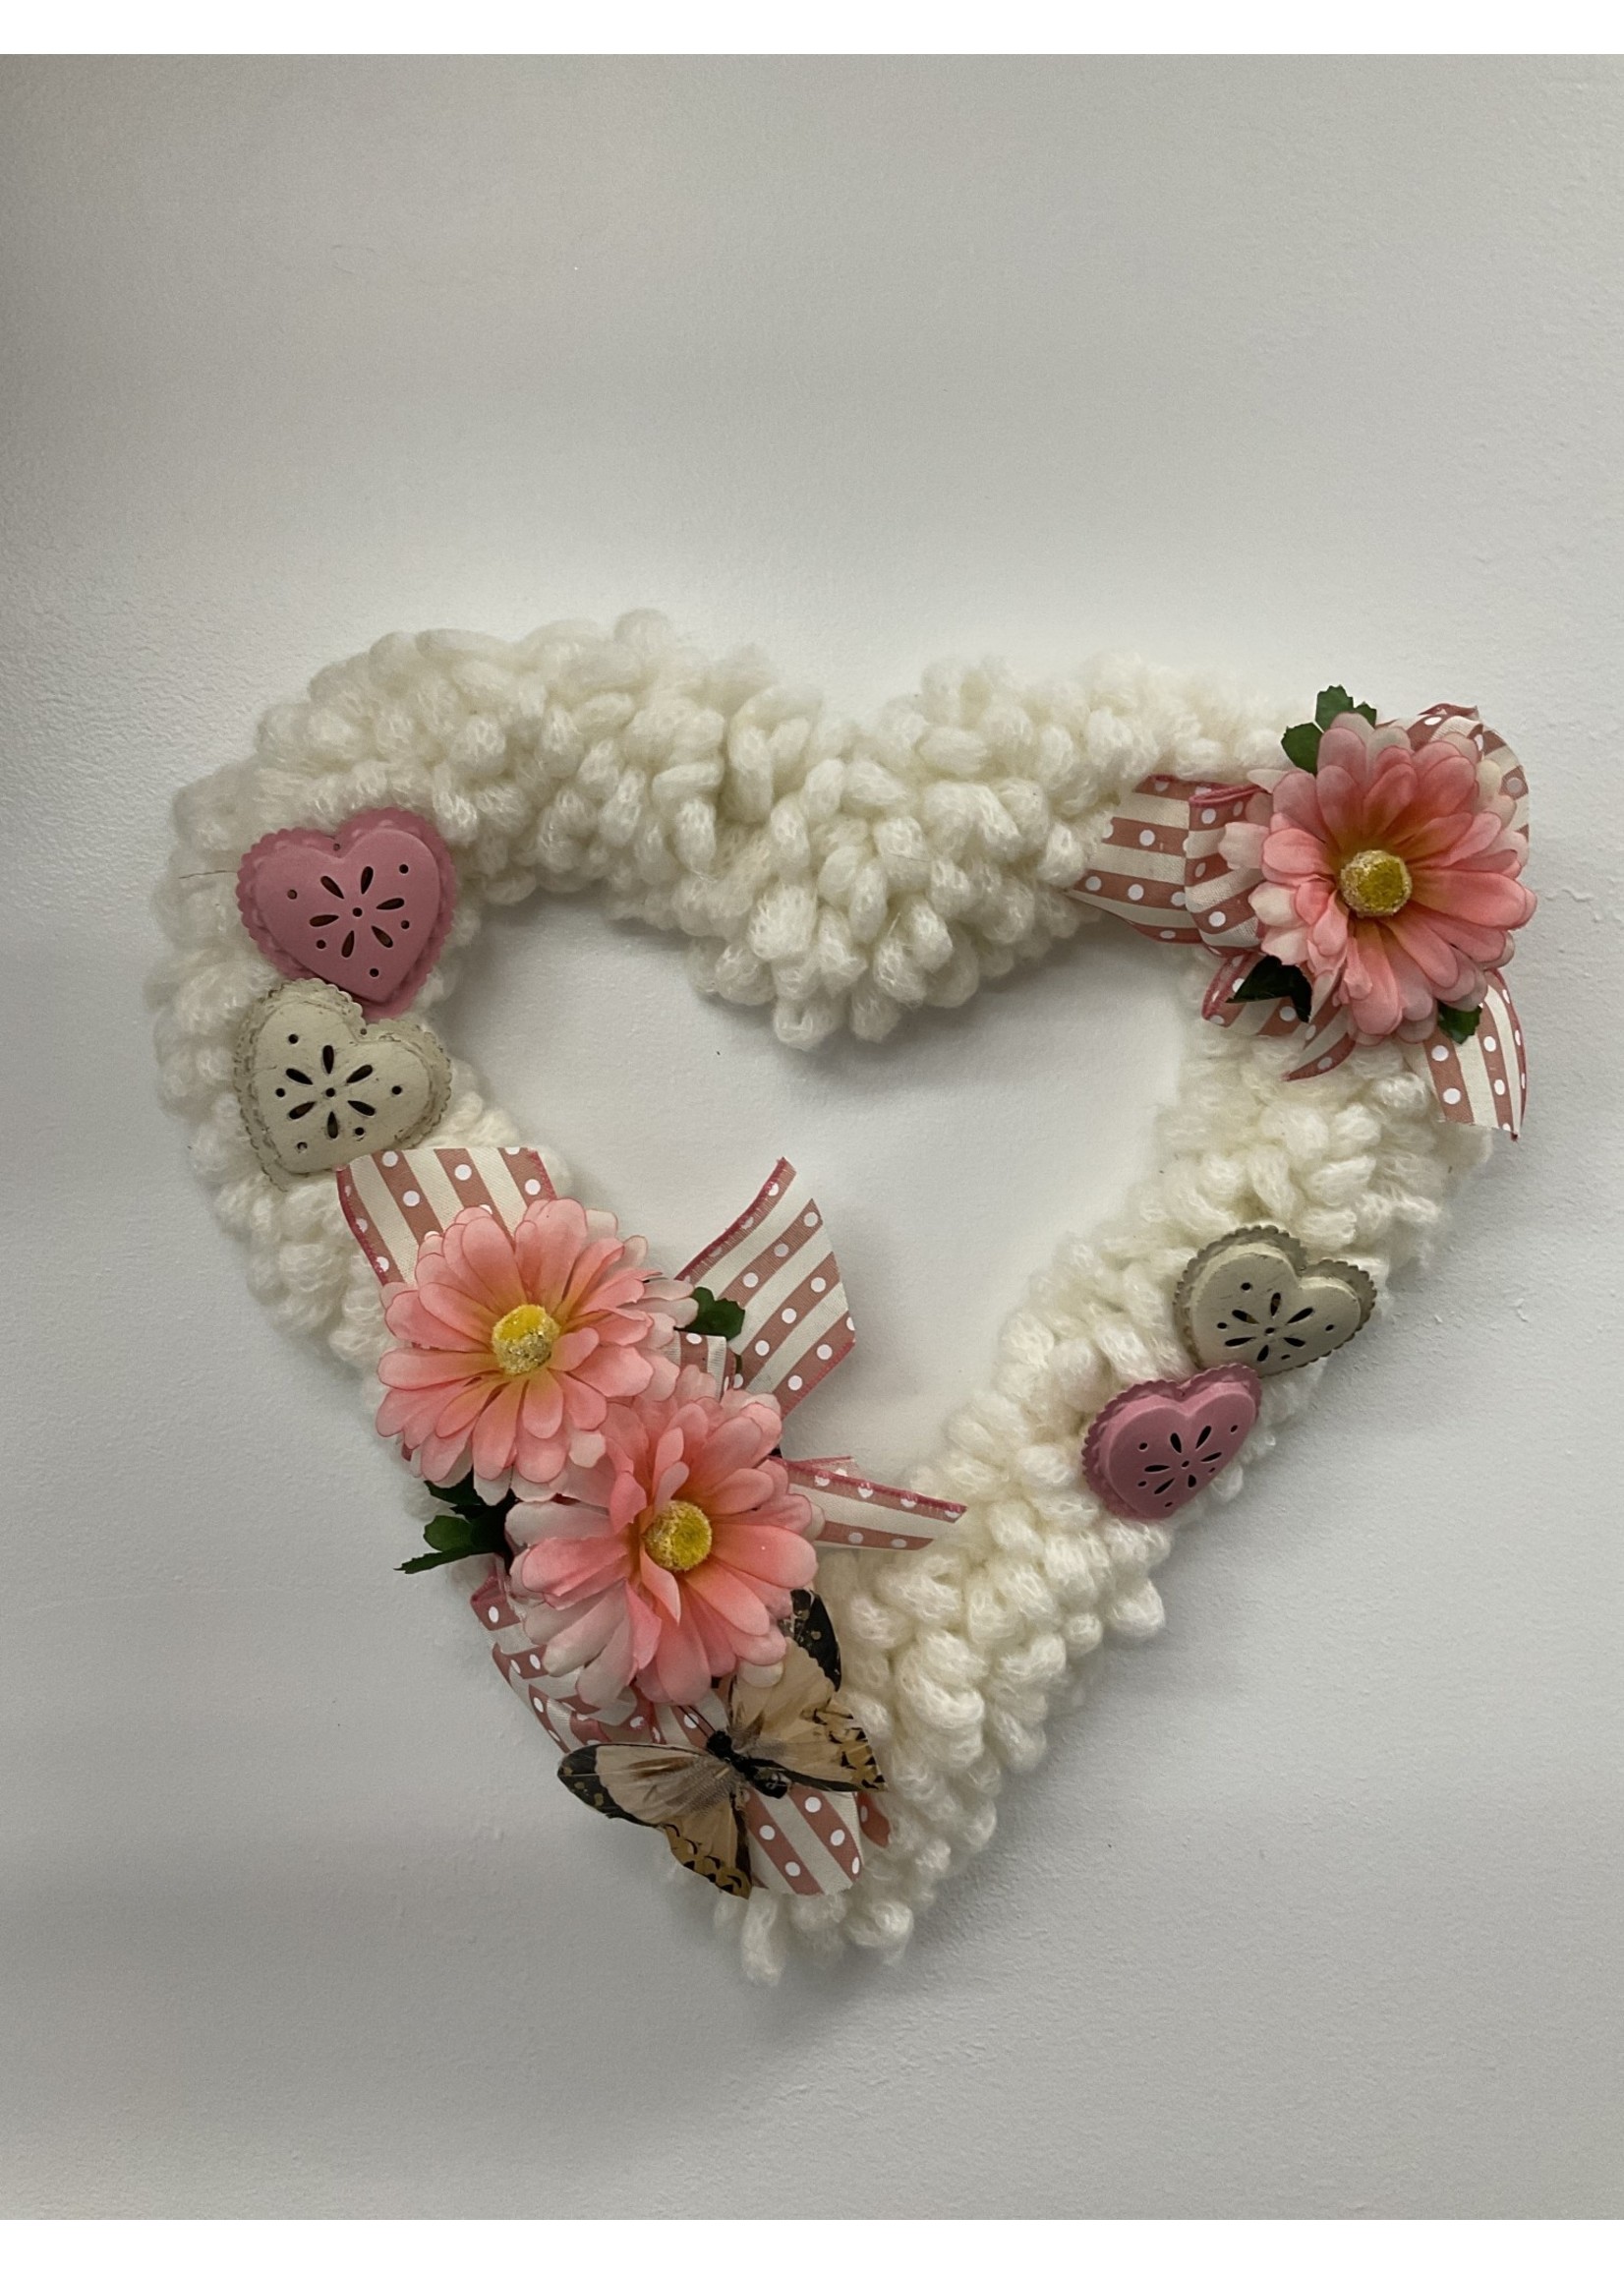 My New Favorite Thing Wreath Yarn Heart Frame White with Pink Flowers, Hearts, Butterfly, Polka Dot Ribbon